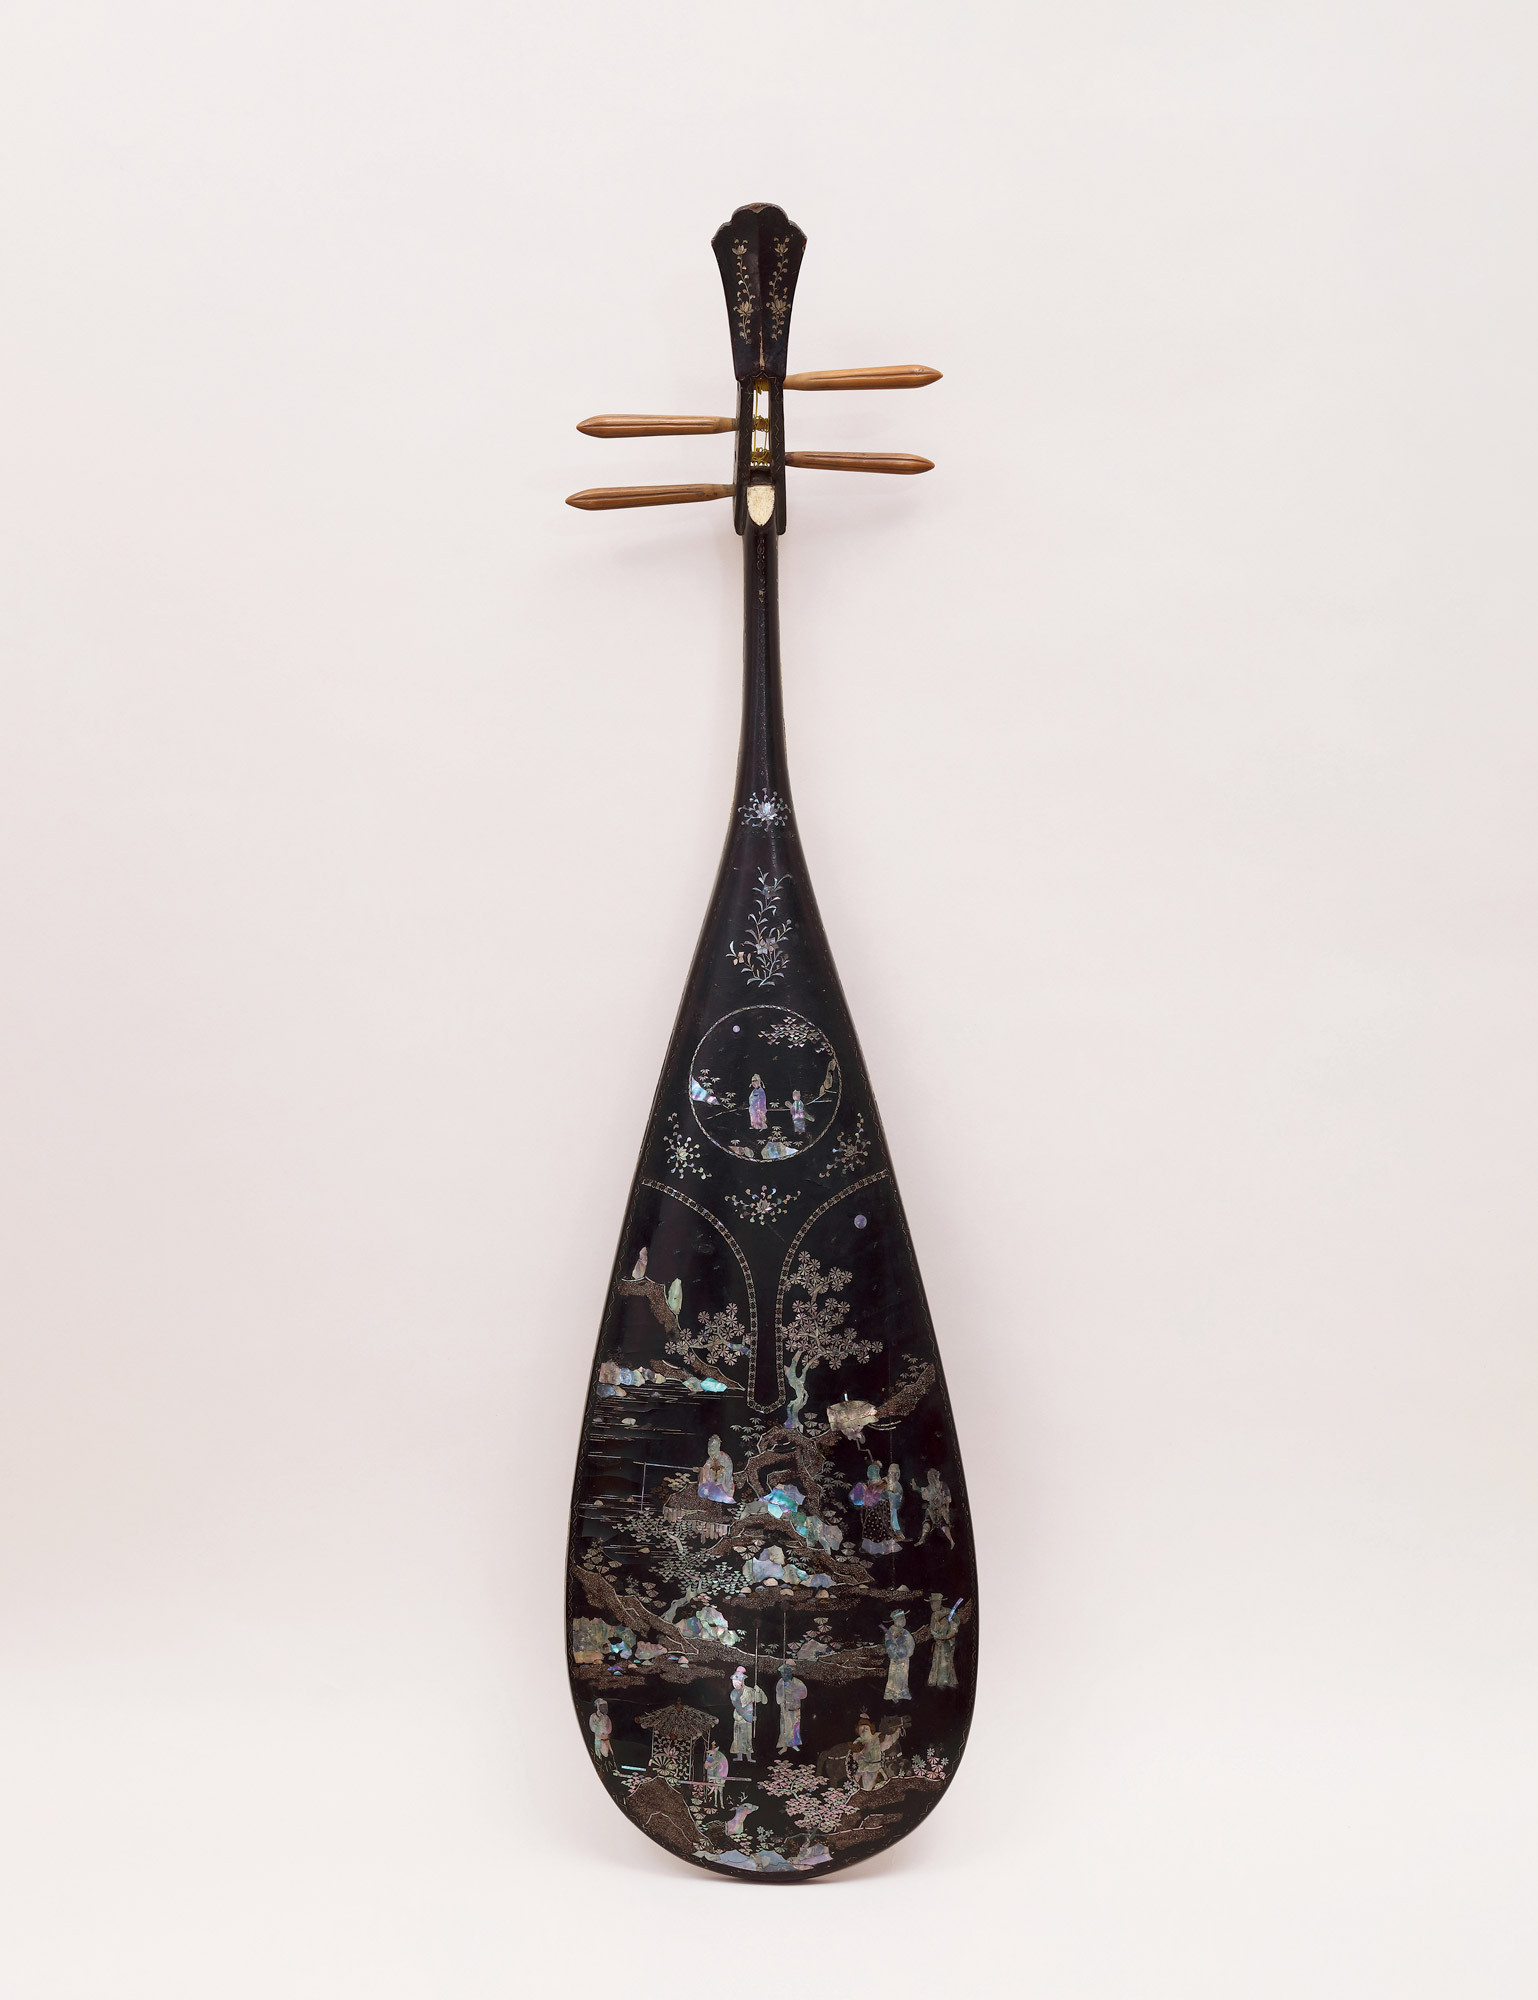 A BLACK LACQUER INLAID WITH MOTHER- OF-PEARL MUSICAL INSTRUMENT， PIPA